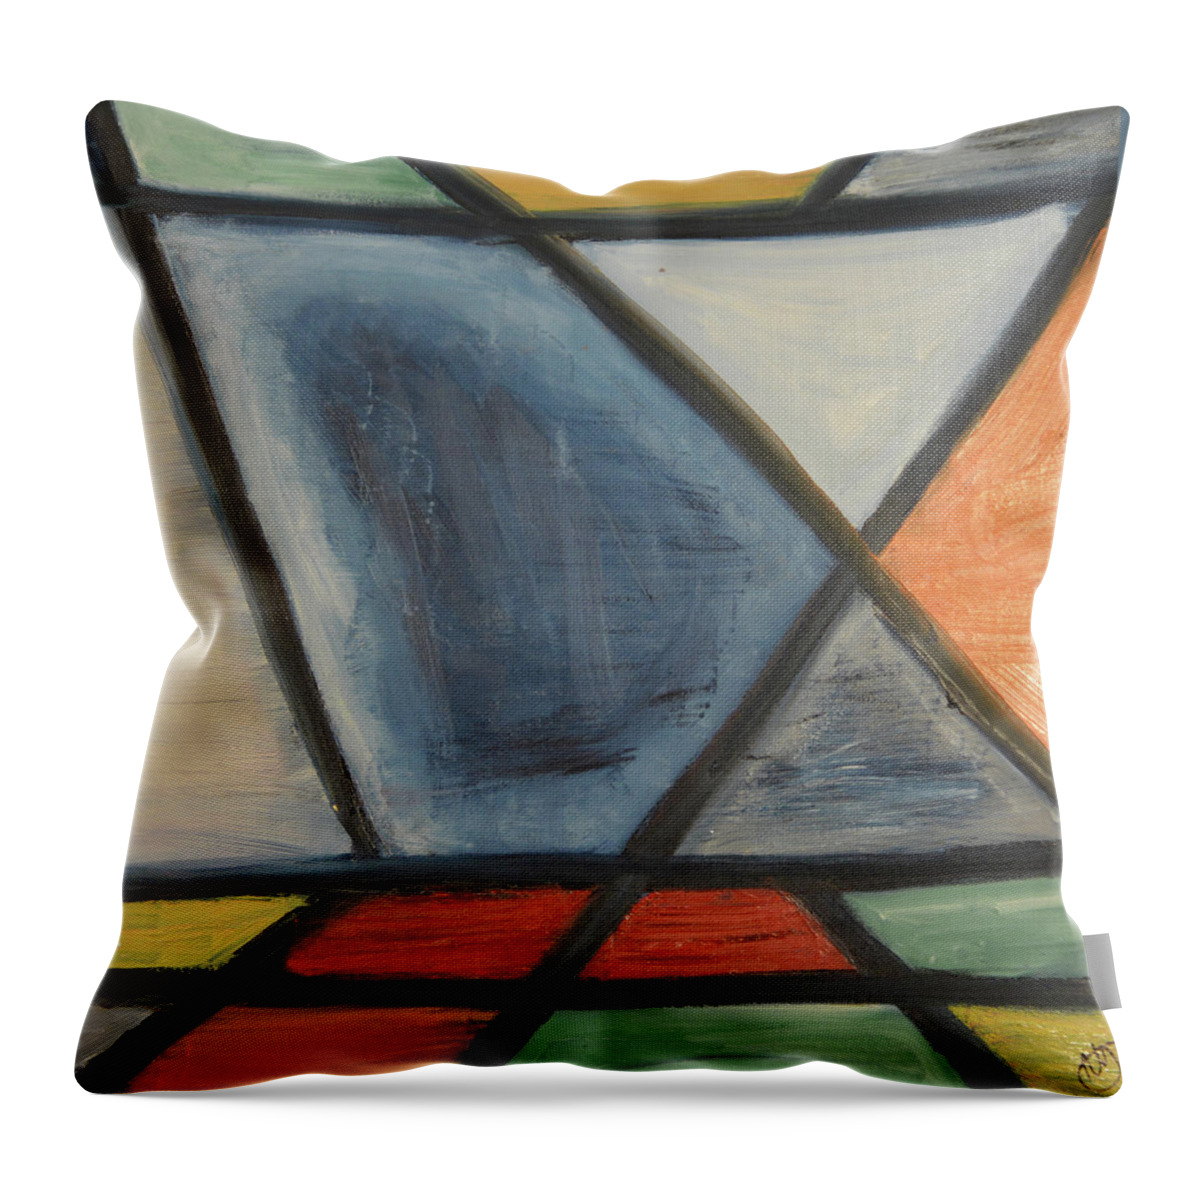 Stainglass Throw Pillow featuring the painting Stain Glass Window by Anita Hummel